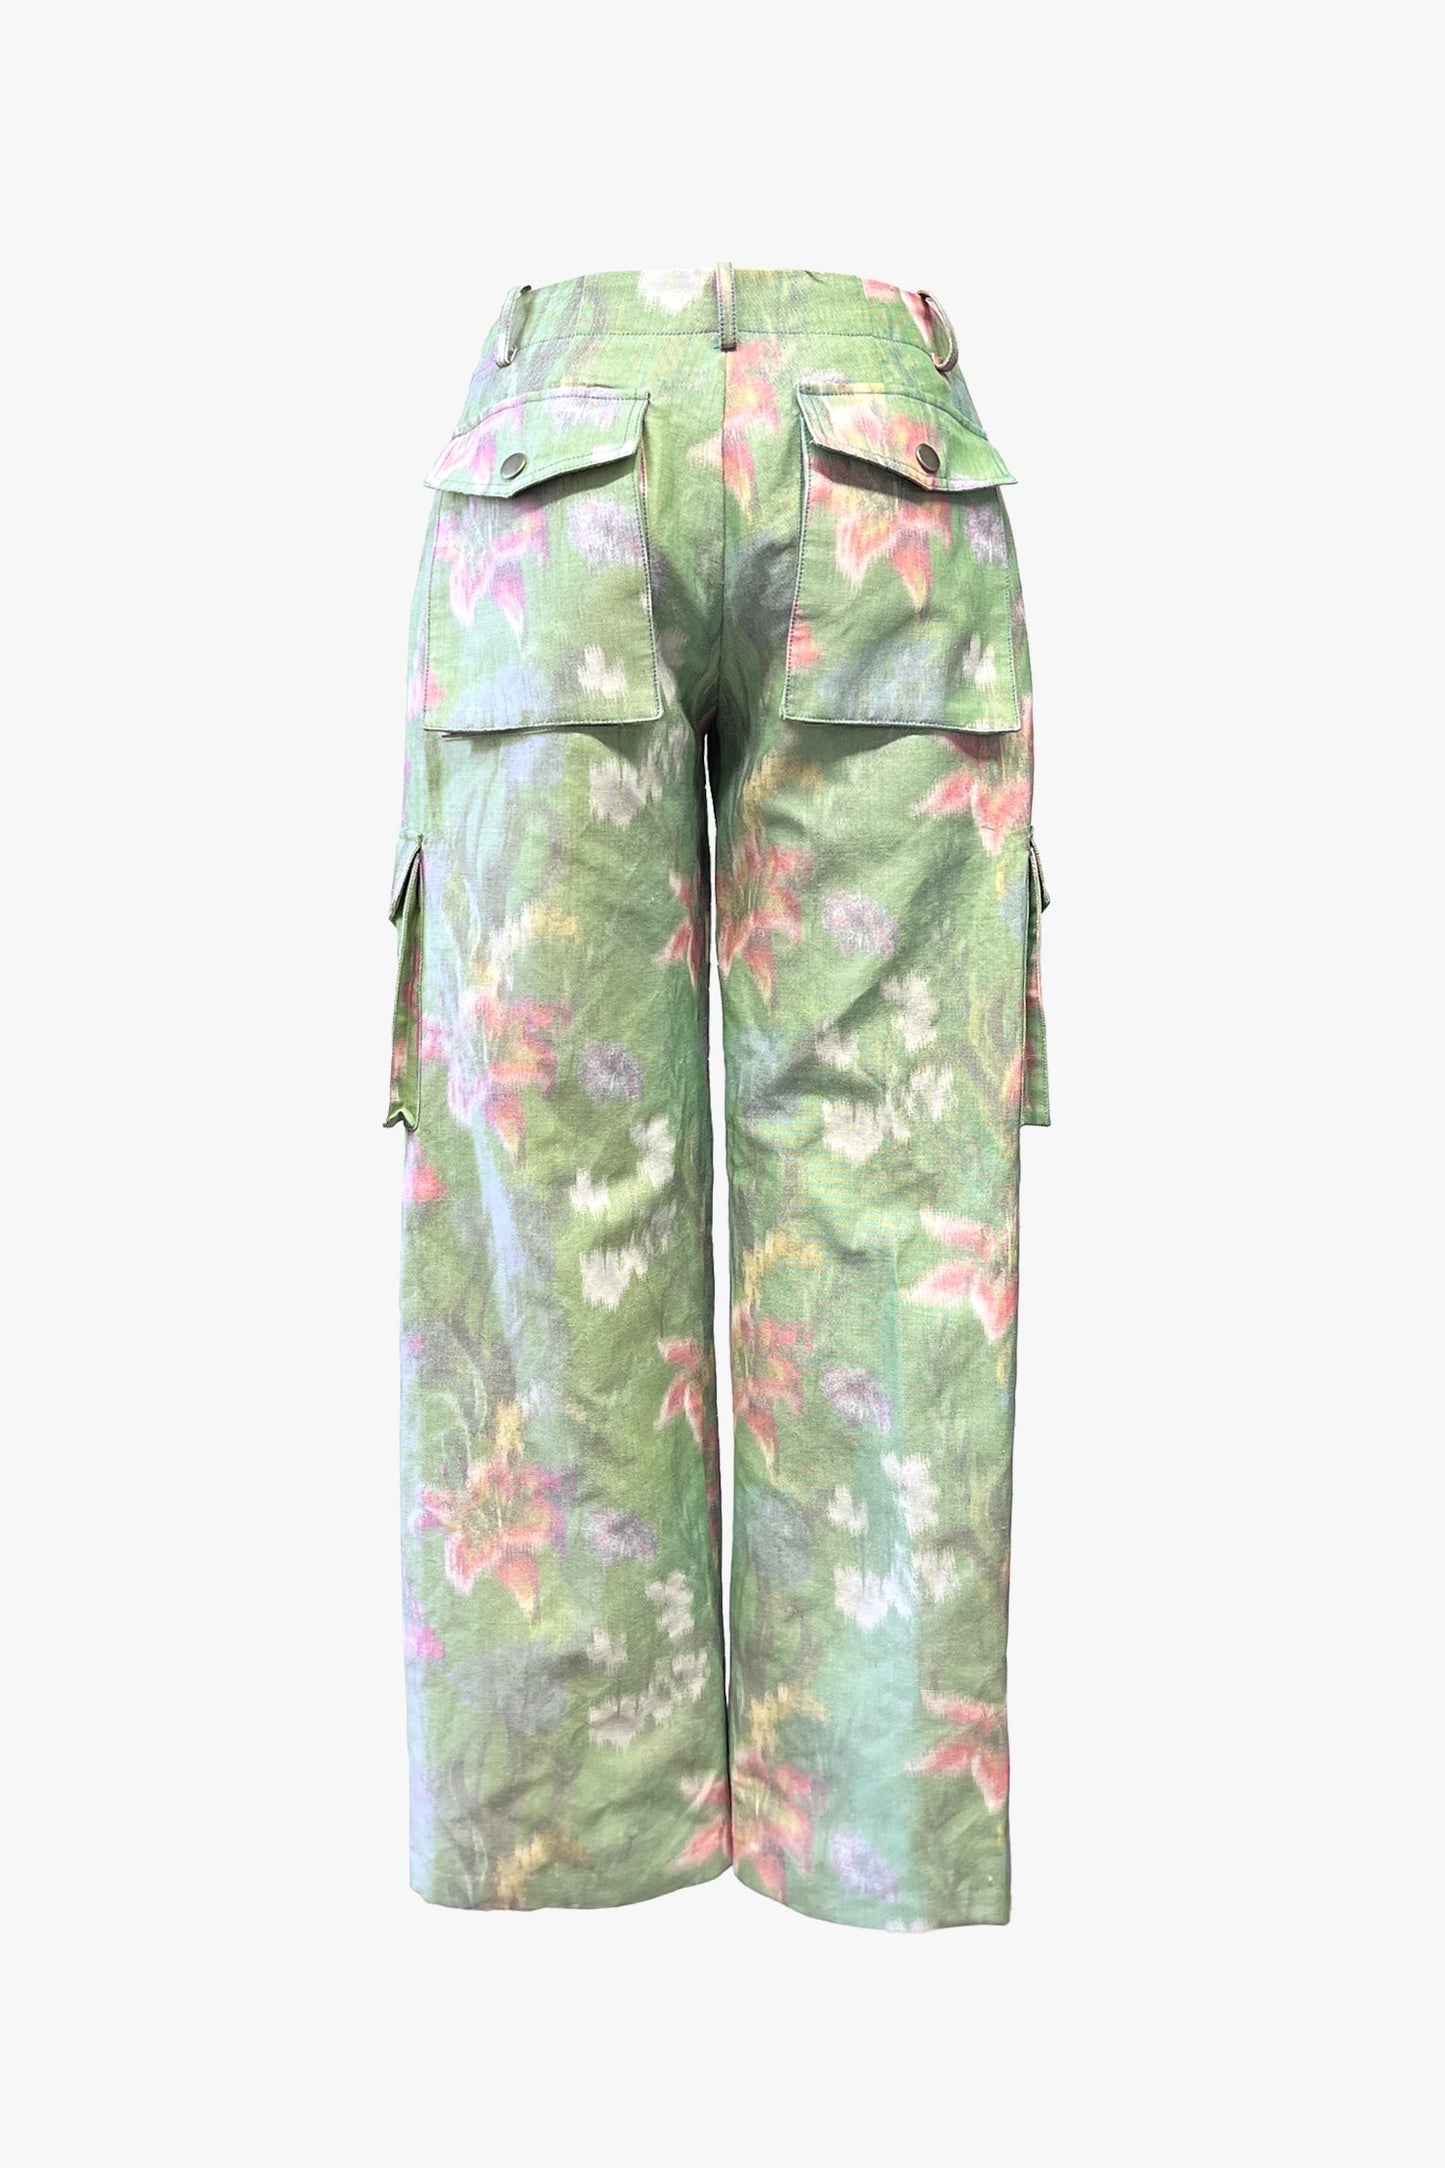 Green Cargo Pants with pink floral design, 2-patch pocket with flap & snap button on the back